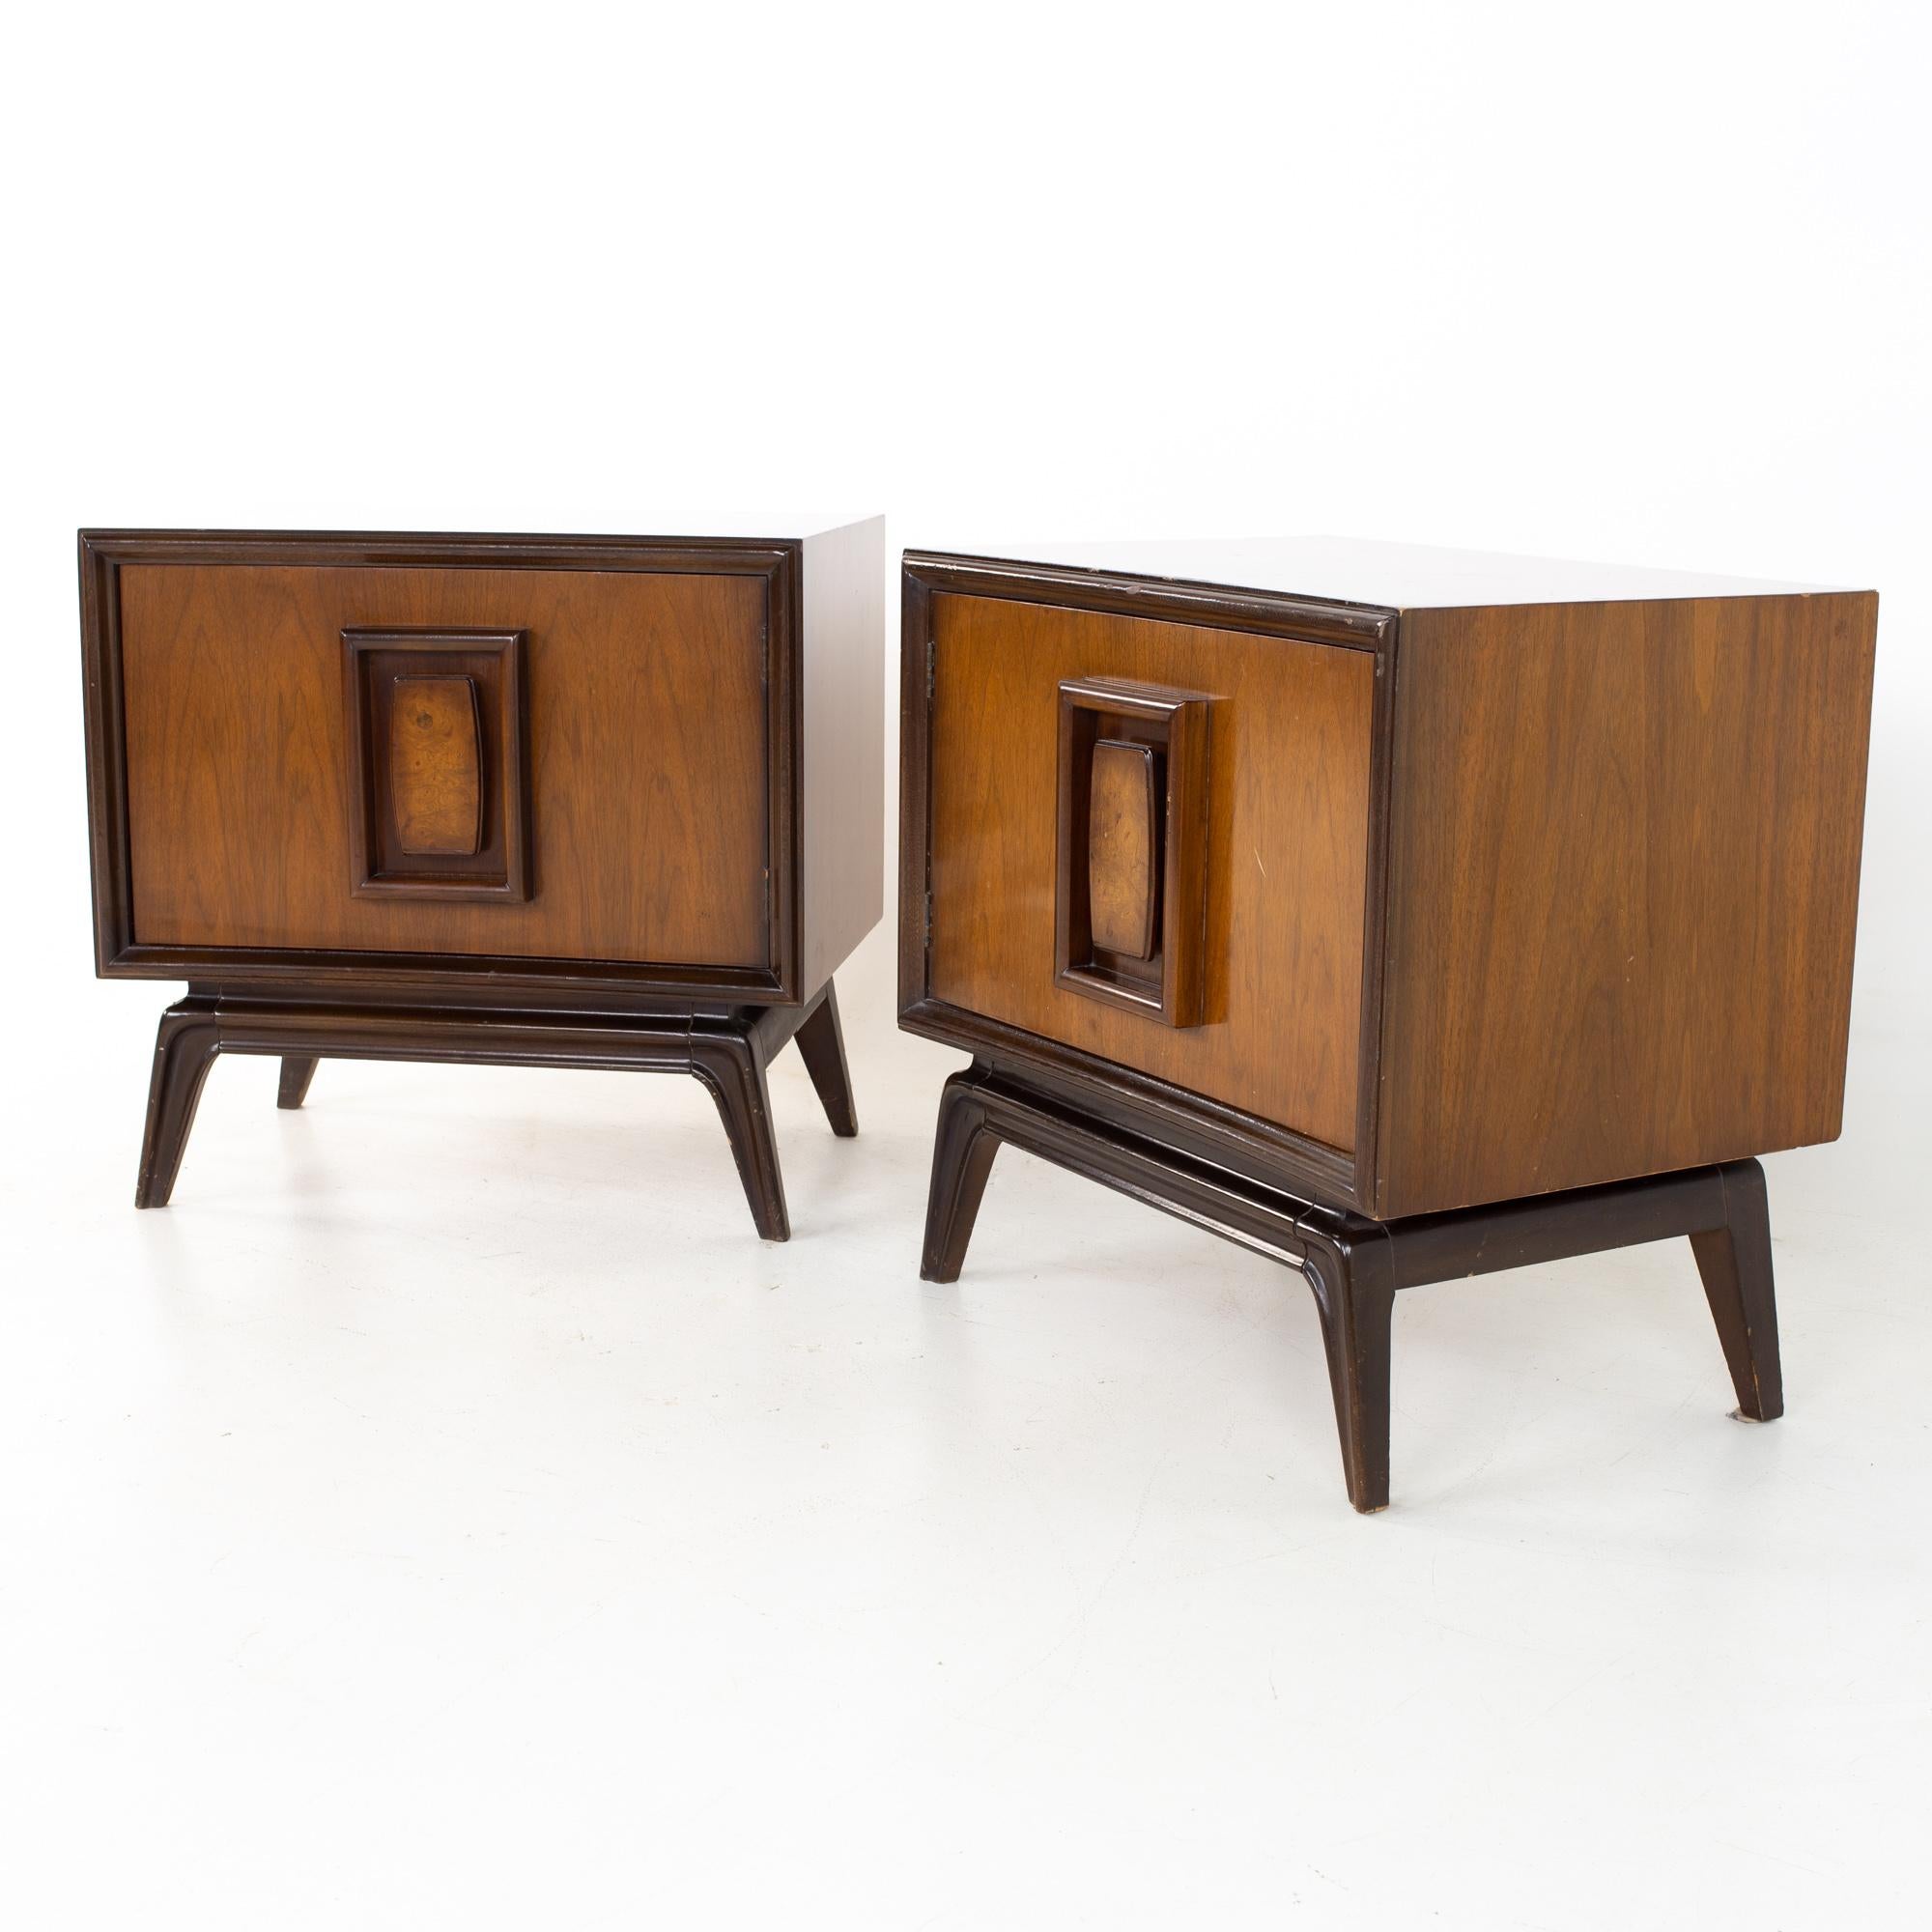 Hoke Wood Products Mid Century walnut and burlwood nightstands, a pair
Each nightstand measures: 26 wide x 18 deep x 25 inches high

All pieces of furniture can be had in what we call restored vintage condition. That means the piece is restored